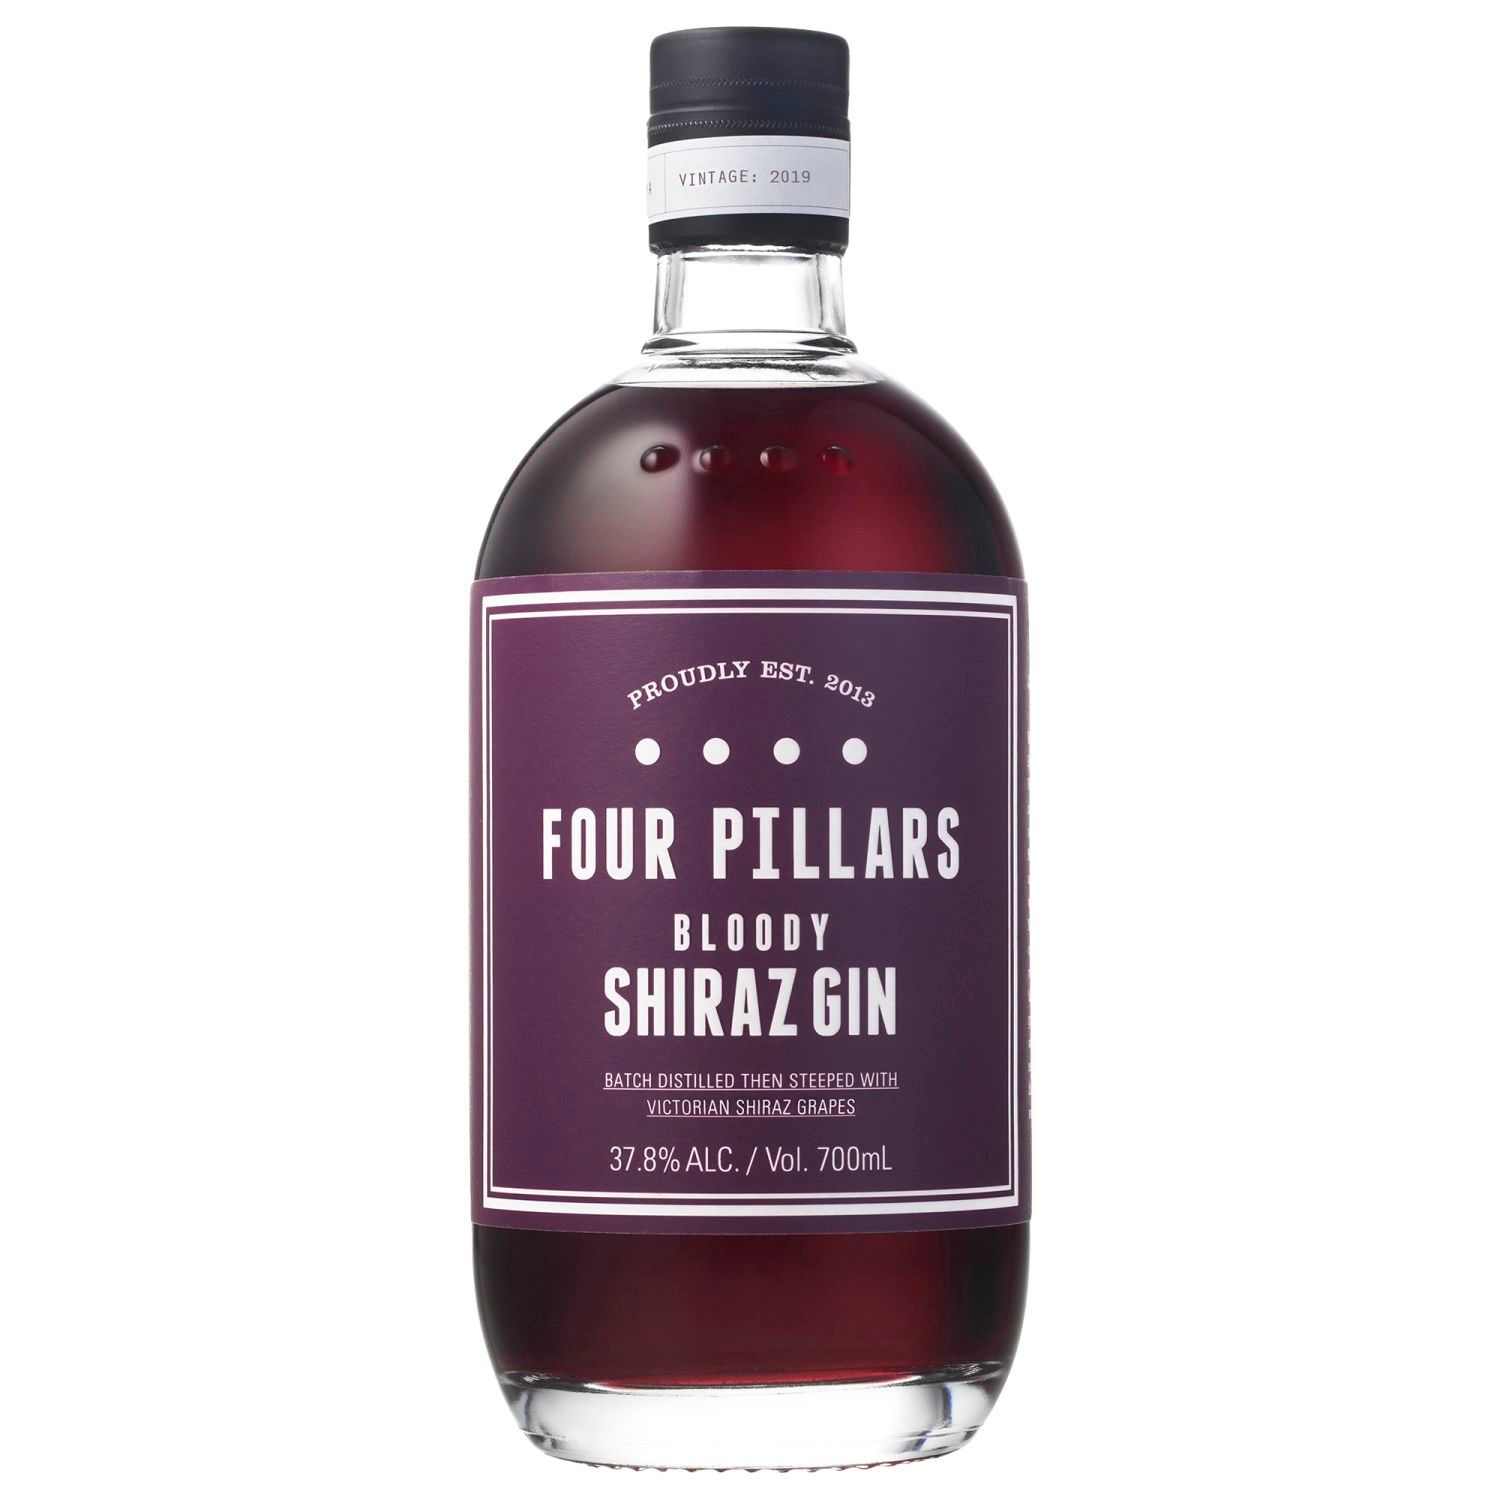 The 2019 release has a great deep, rich, reddish colour. With pine forest juniper notes followed by dark fruit, red berries and spice, and is shows plenty of that classic Yarra Shiraz white pepper. The palate is beautifully balanced with both sweetness and gin in spades and some nice tannins on the finish.<br /> <br />Alcohol Volume: 37.80%<br /><br />Pack Format: Bottle<br /><br />Standard Drinks: 20.9</br /><br />Pack Type: Bottle<br /><br />Country of Origin: Australia<br />